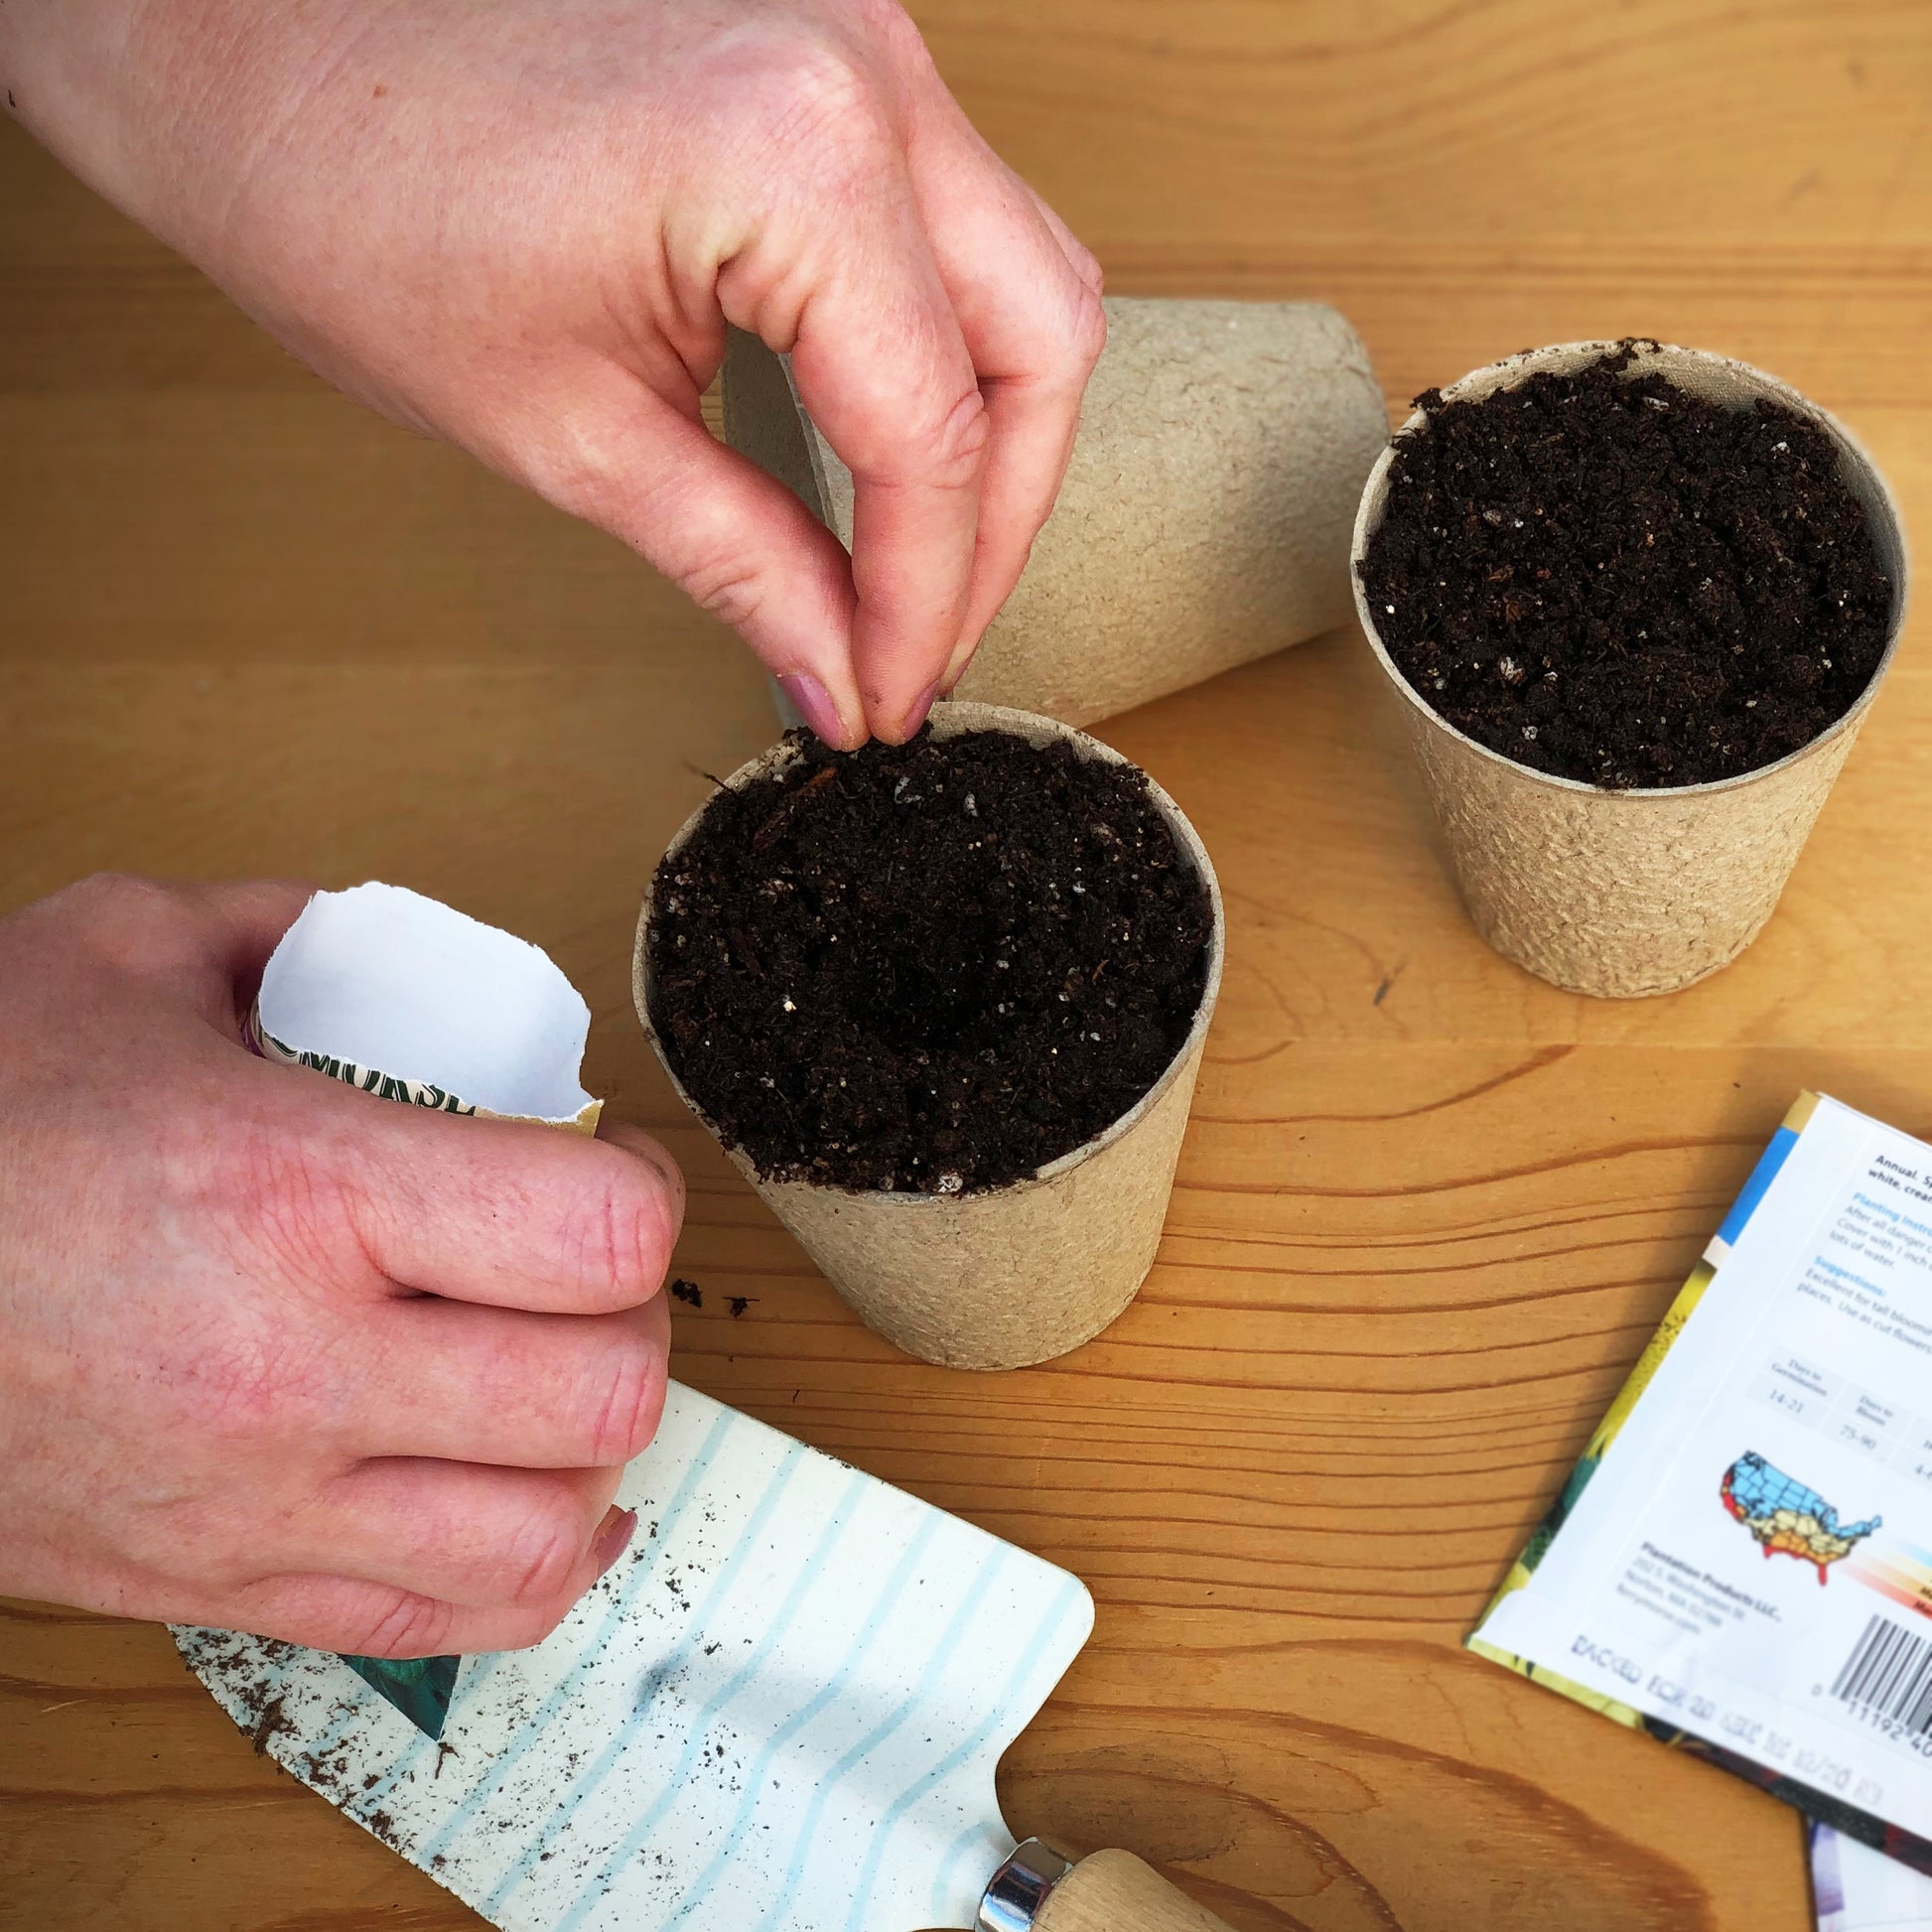 Sowing Slicer Cucumber Seeds into biodegradable Jiffy peat pots filled with sowing medium